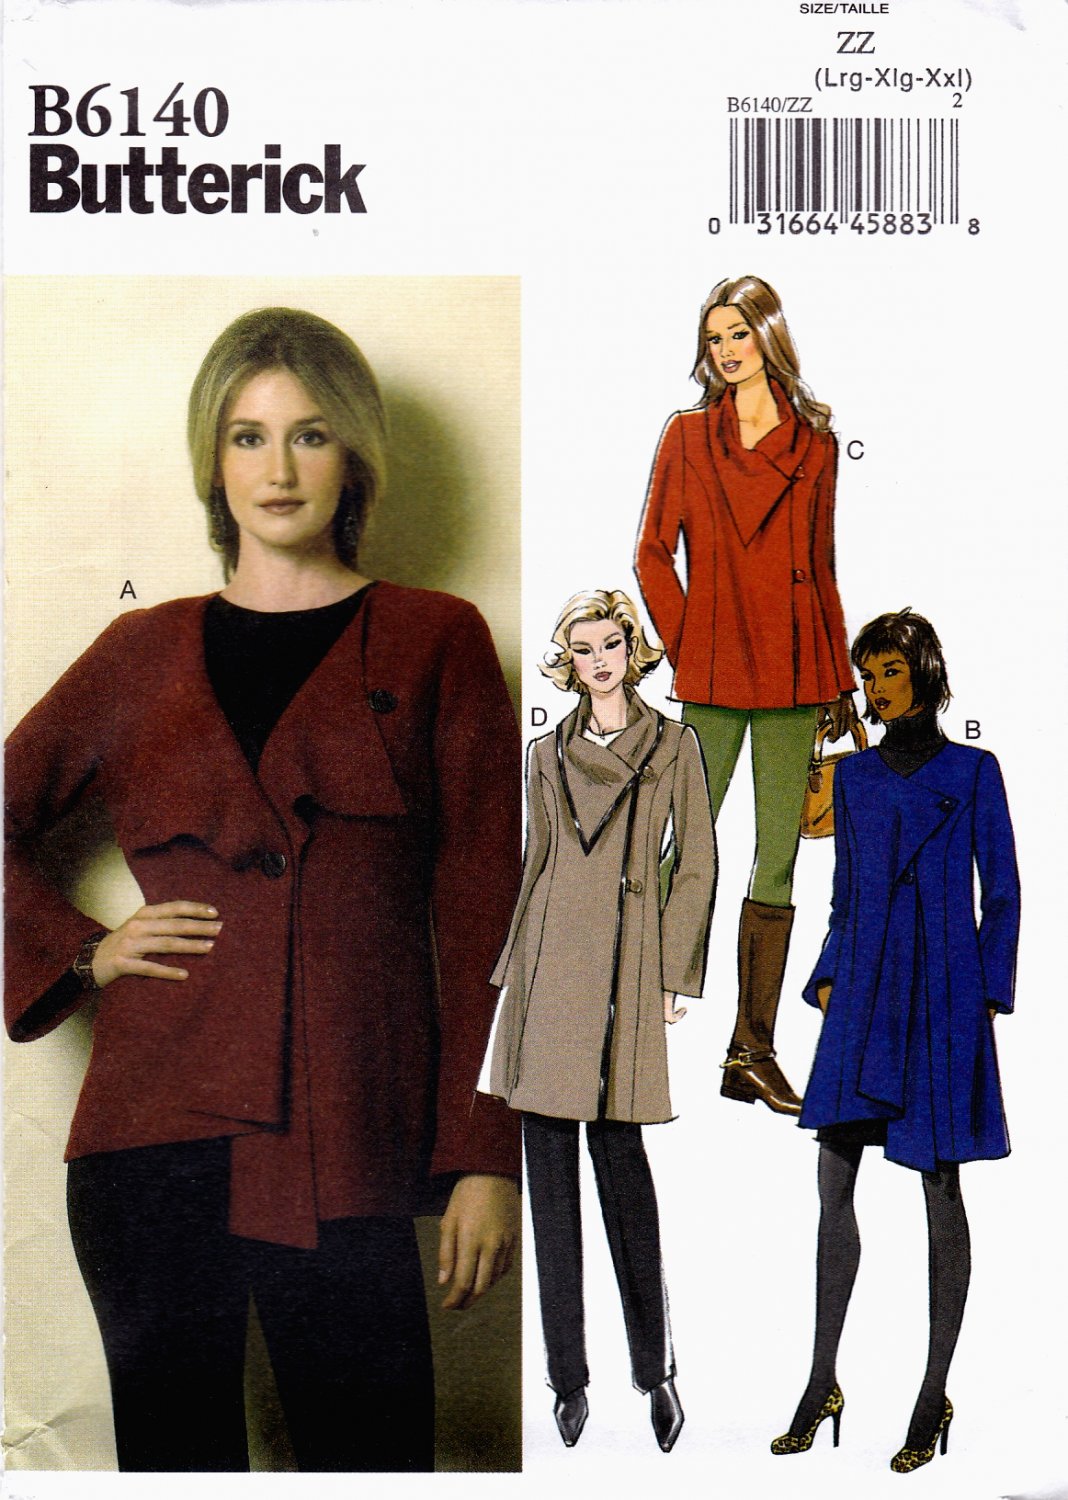 Butterick B6140 Misses Jacket and Coat Sewing Pattern Sizes Lrg-Xlg-XXL